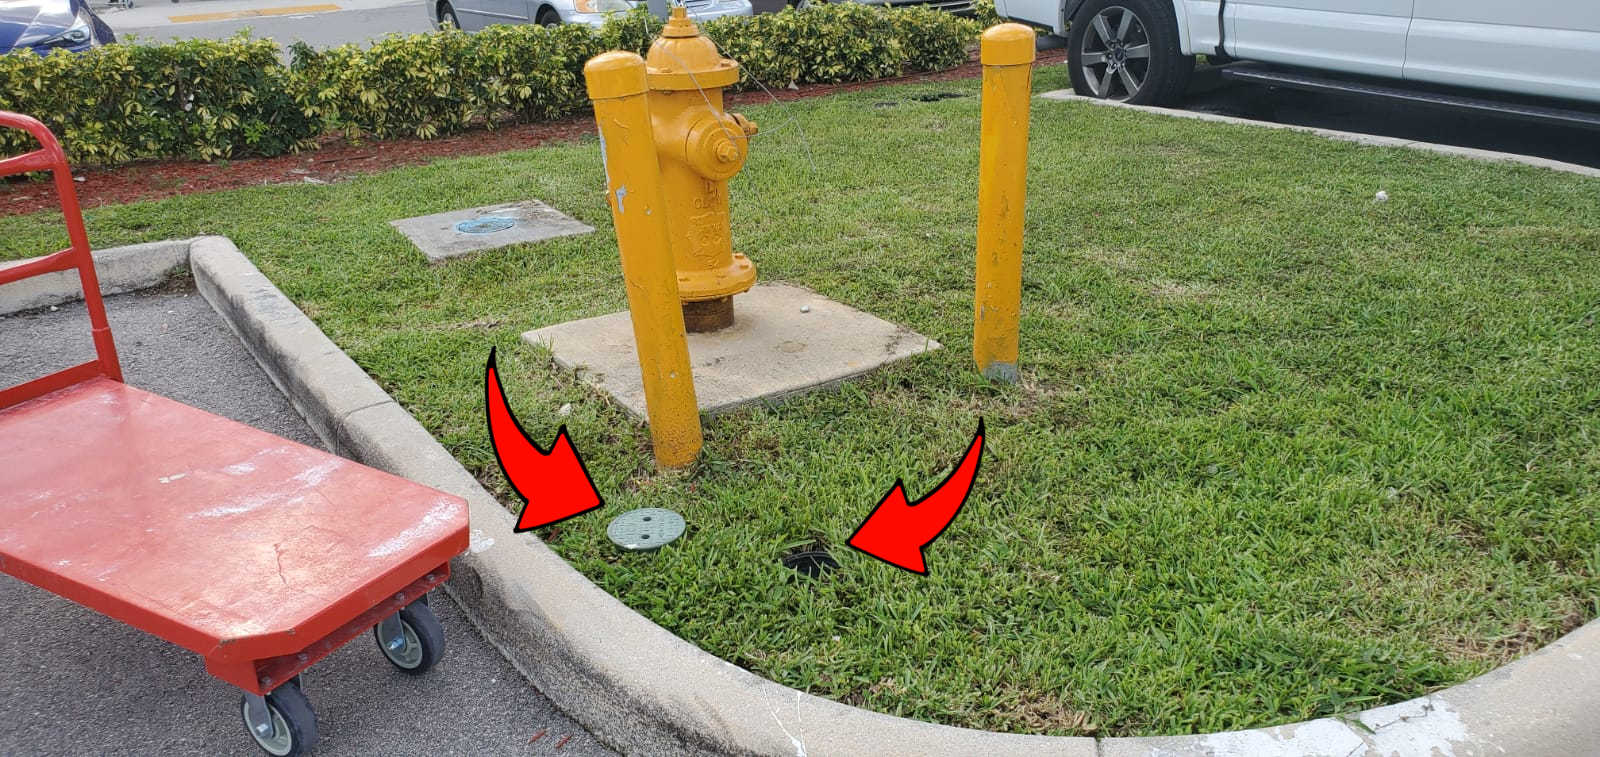 arrows pointing at the cover of an irrigation control valve laying in the grass, next to the uncovered irrigation control valve.  